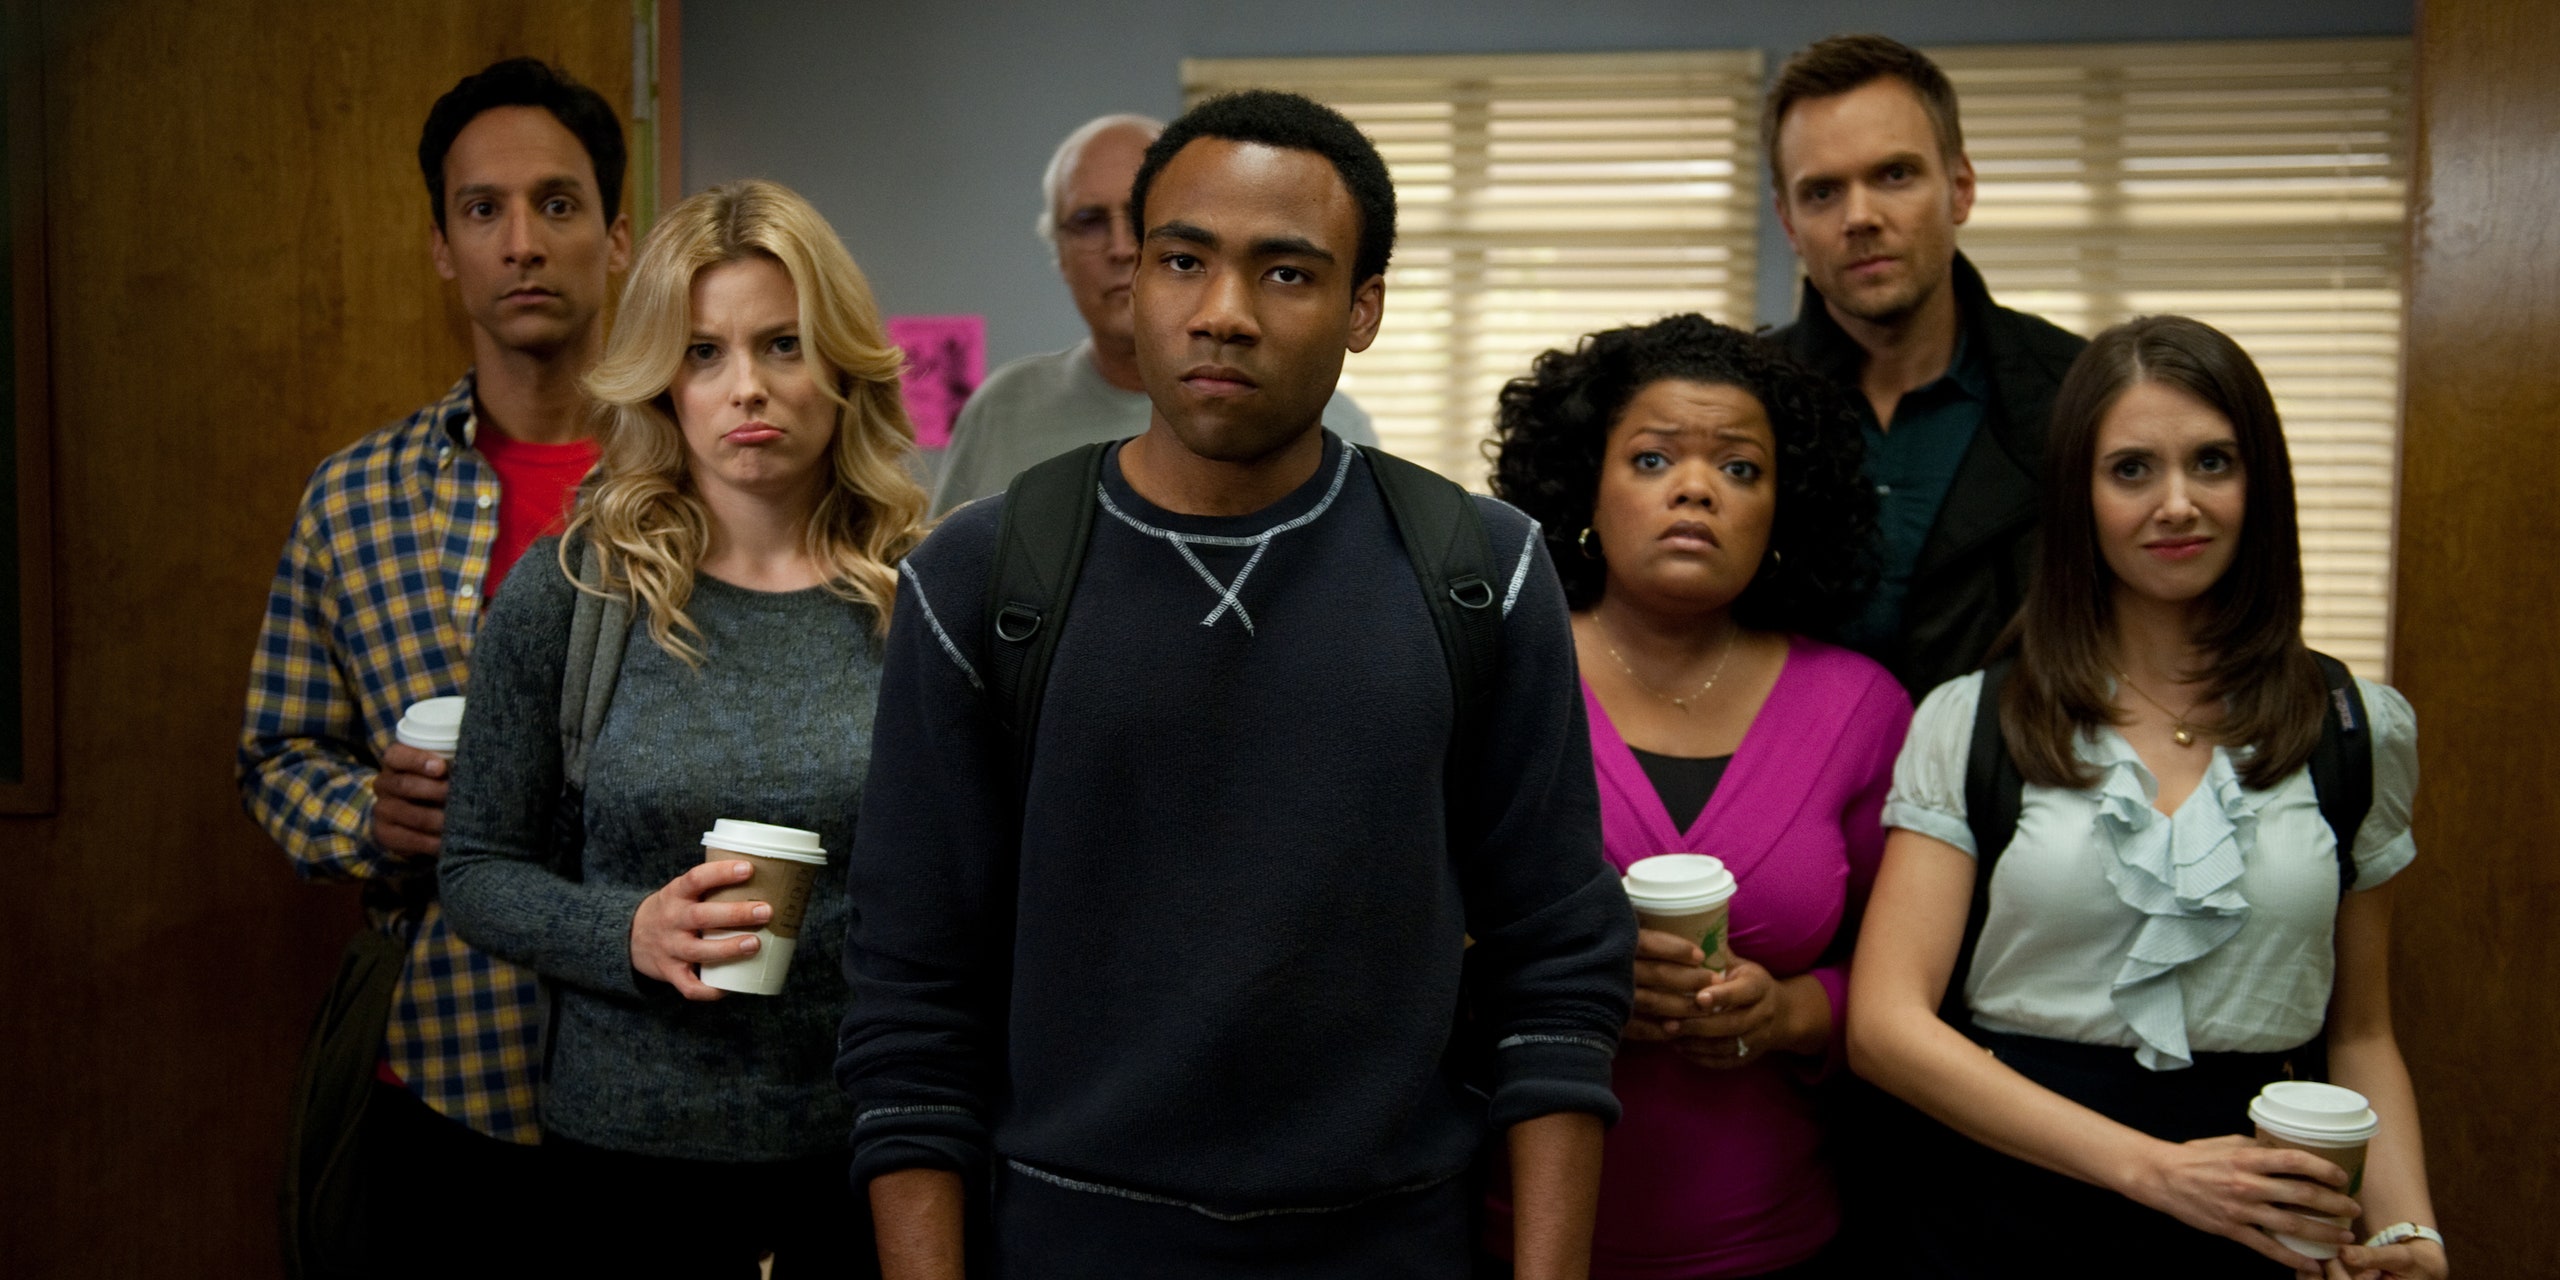 The ‘Community’ Reunion Is Finally Happening & YES, That Means Donald Glover Too